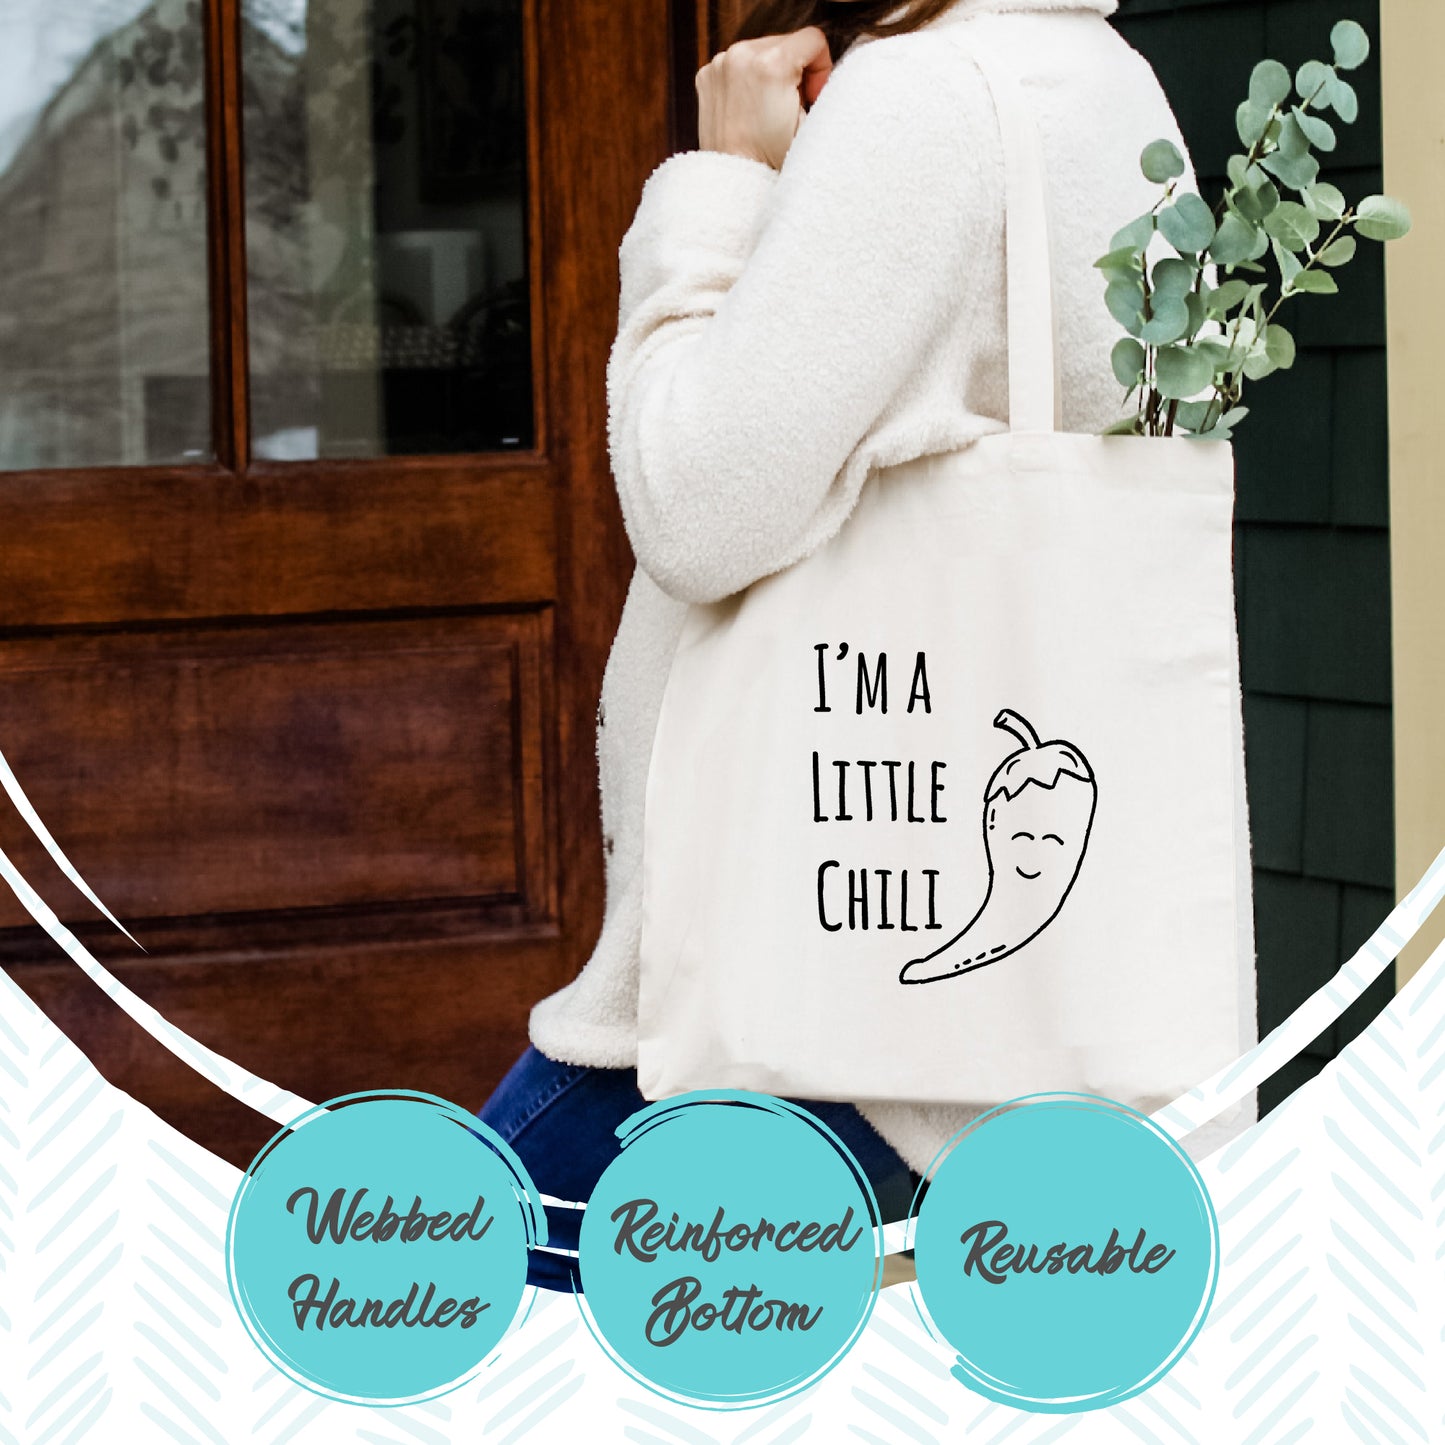 I Make Pour Decisions - Tote Bag - MoonlightMakers